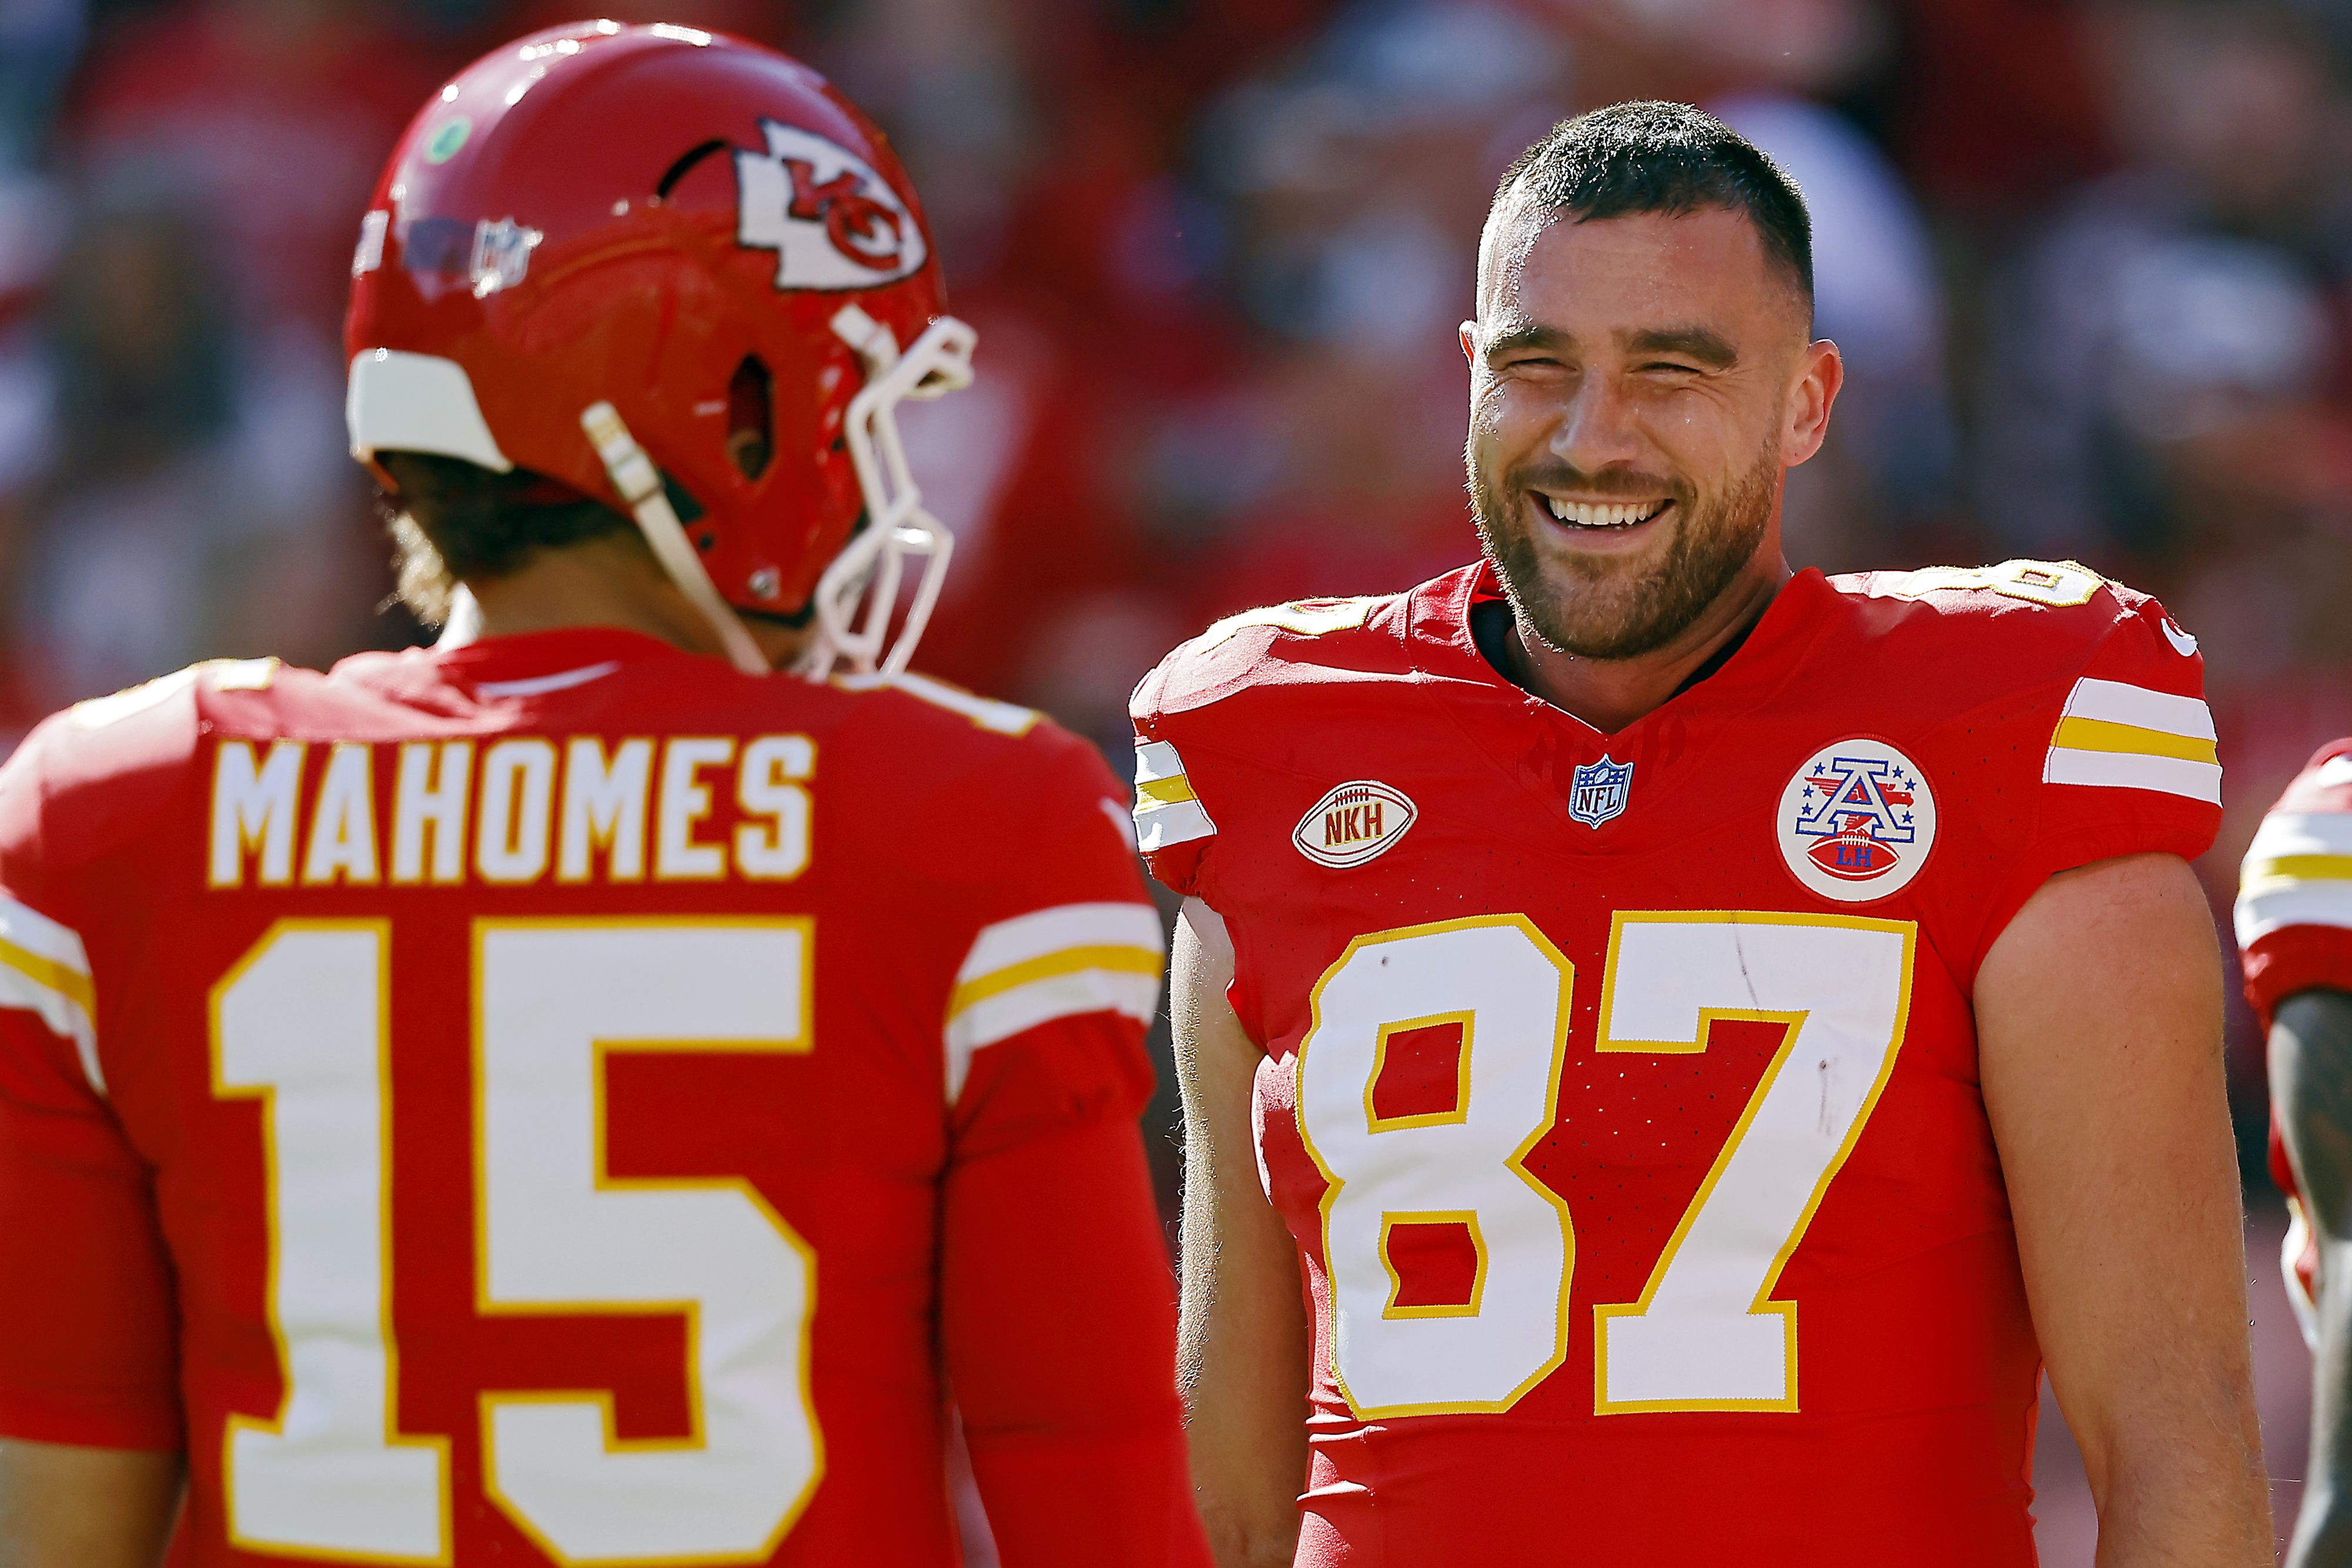 Patrick Mahomes and Travis Kelce on the field